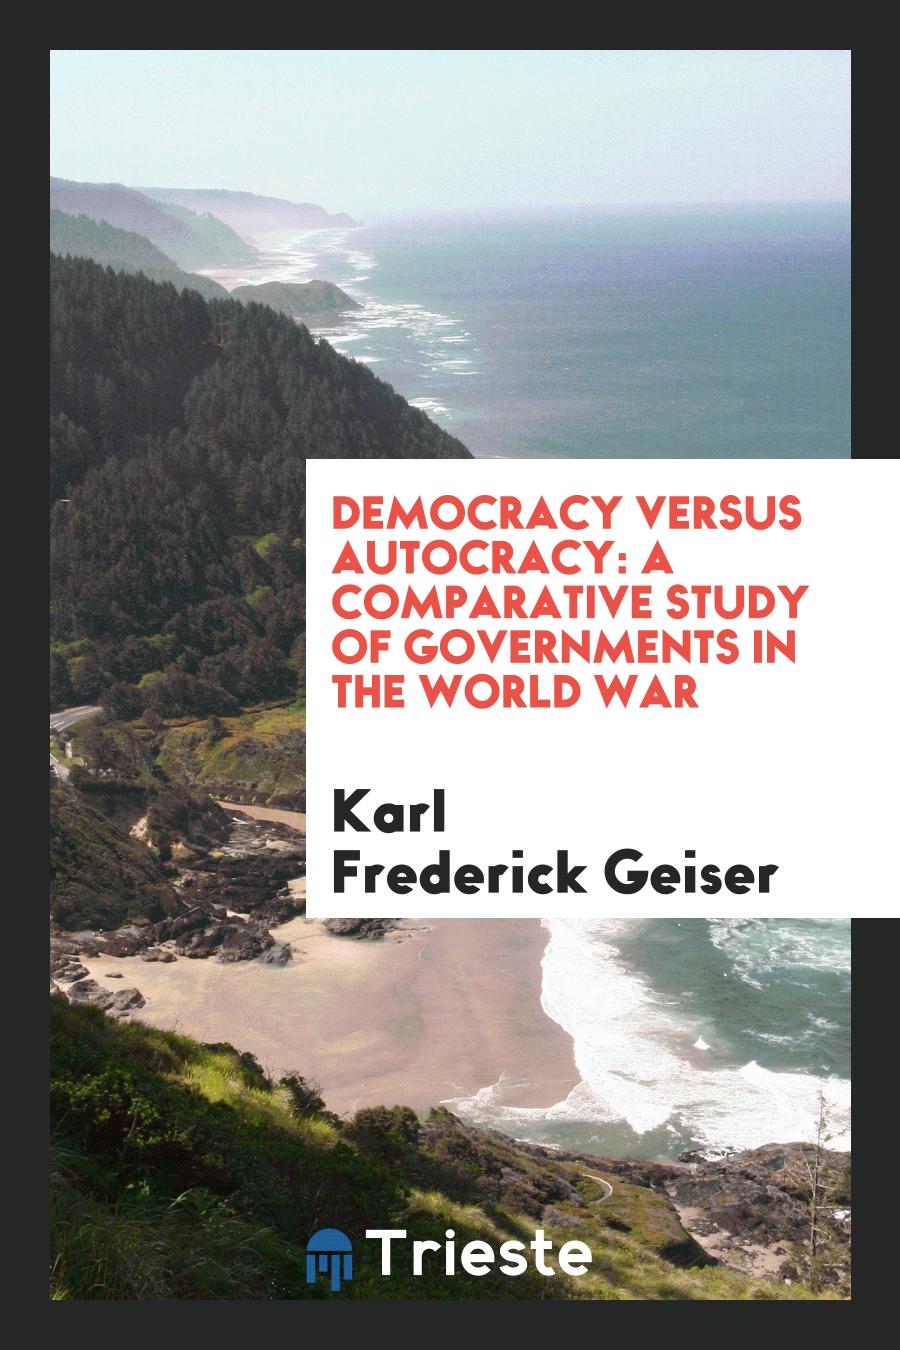 Democracy Versus Autocracy: A Comparative Study of Governments in the World War